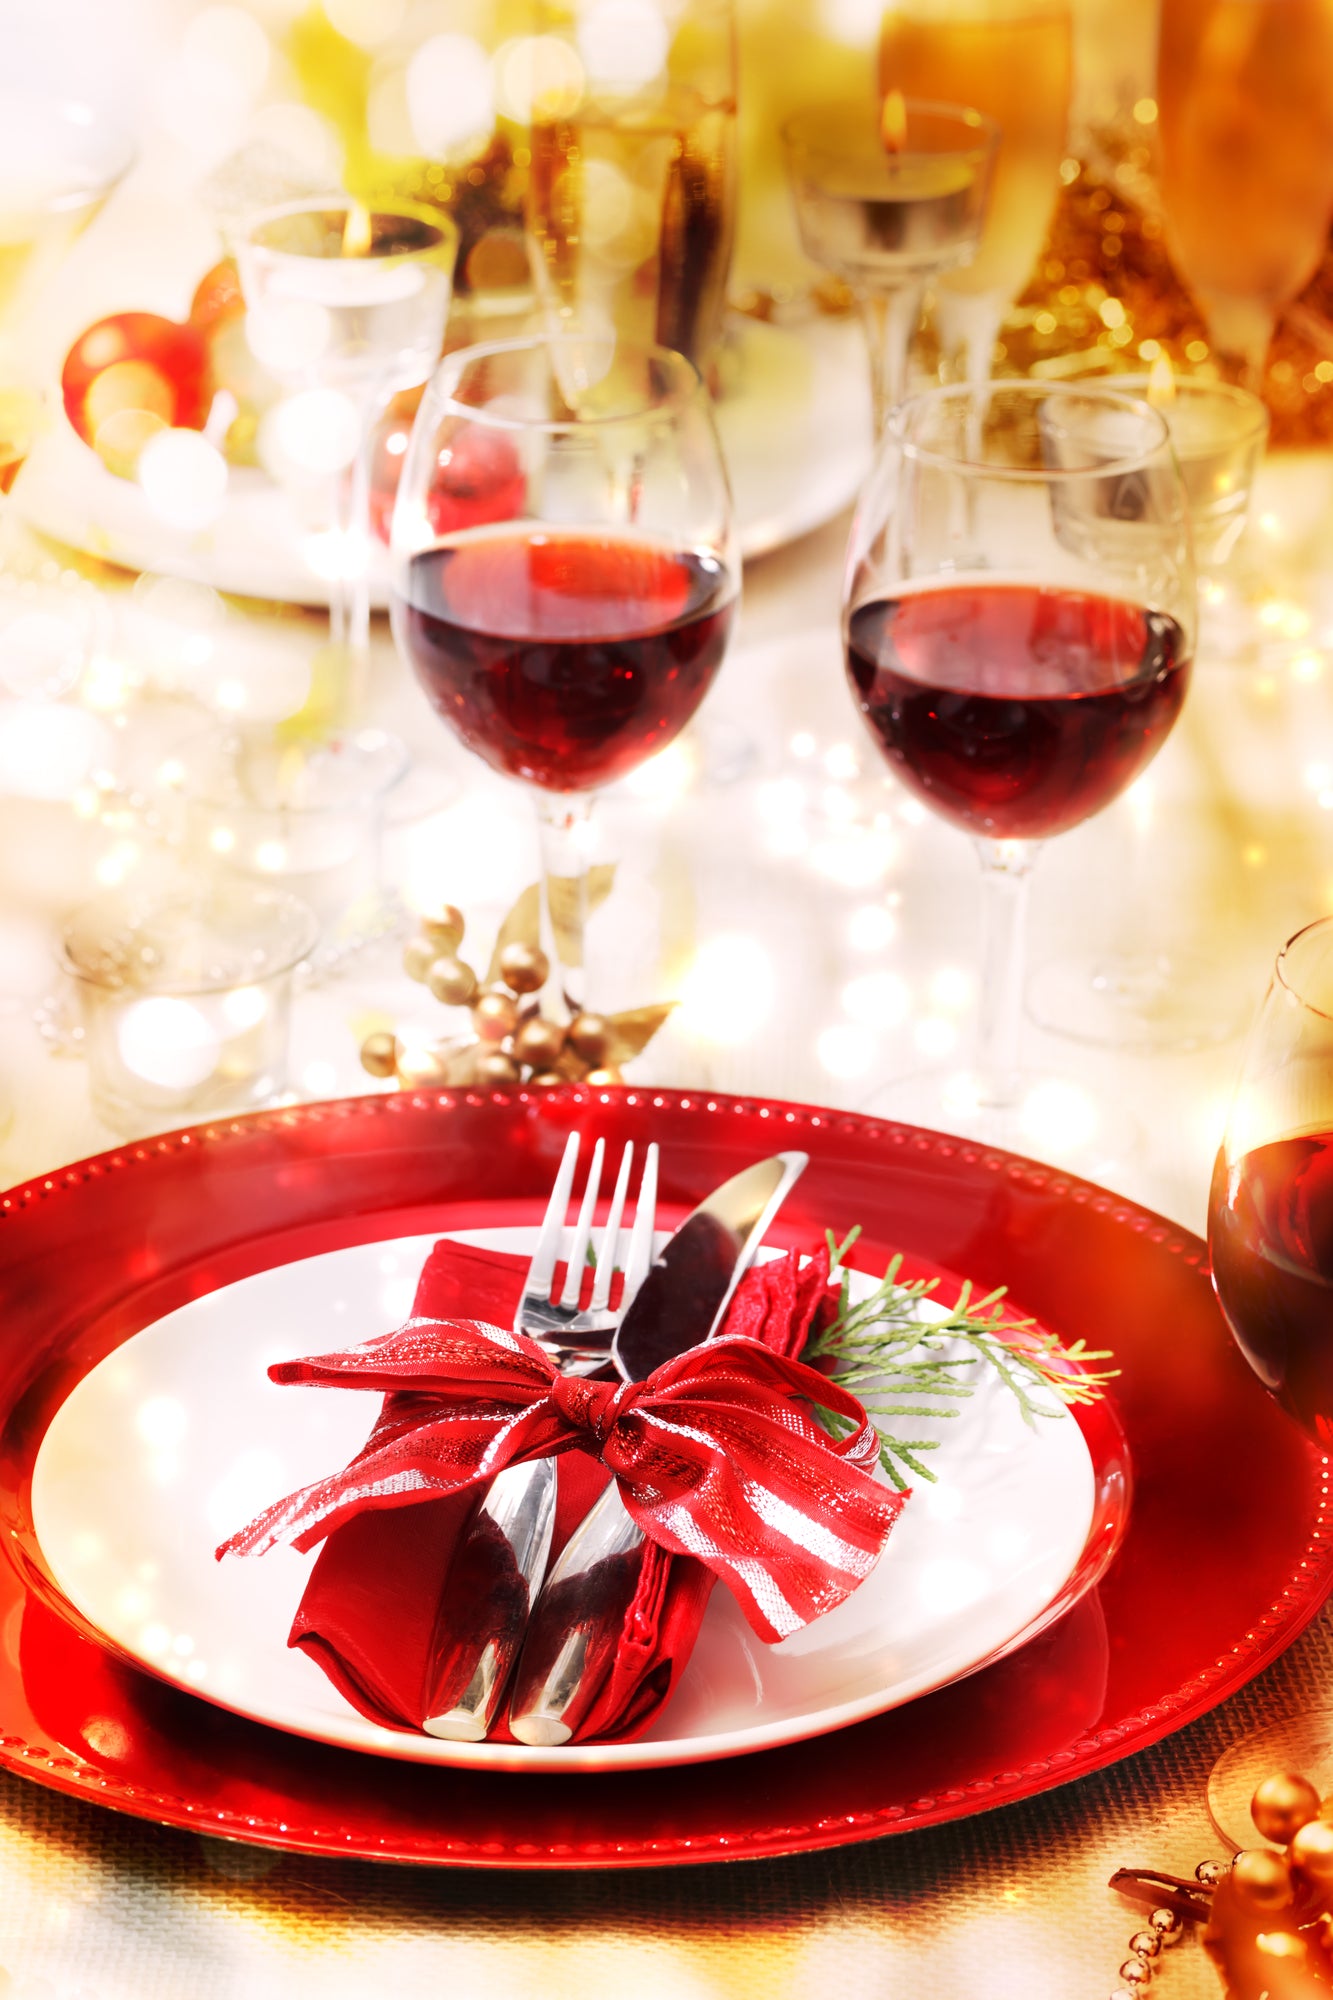 How To Throw a Wine-Themed Christmas Party